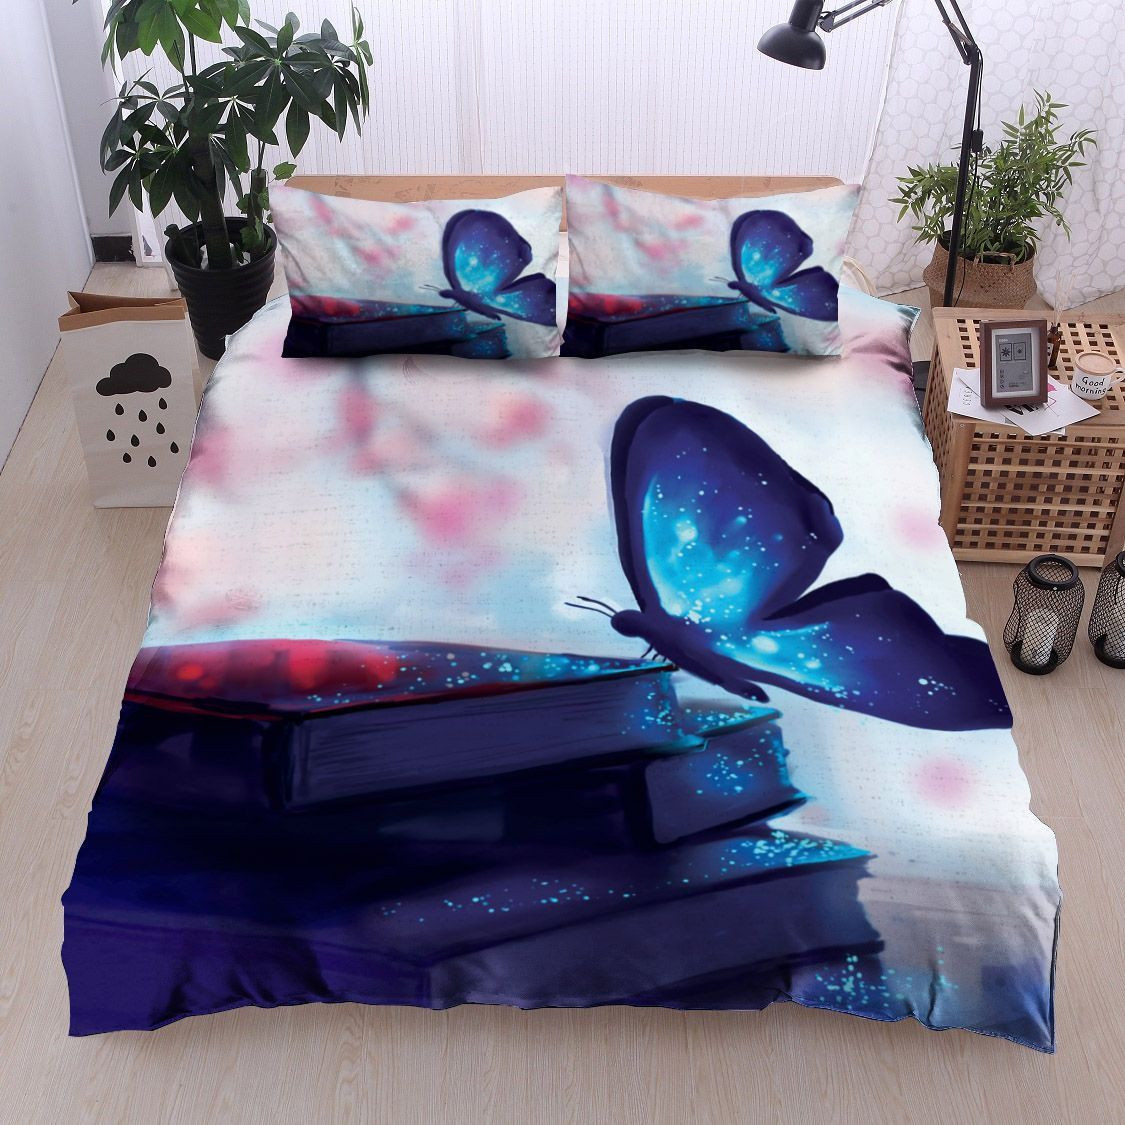 Butterfly And Books DN0511020B Bedding Sets